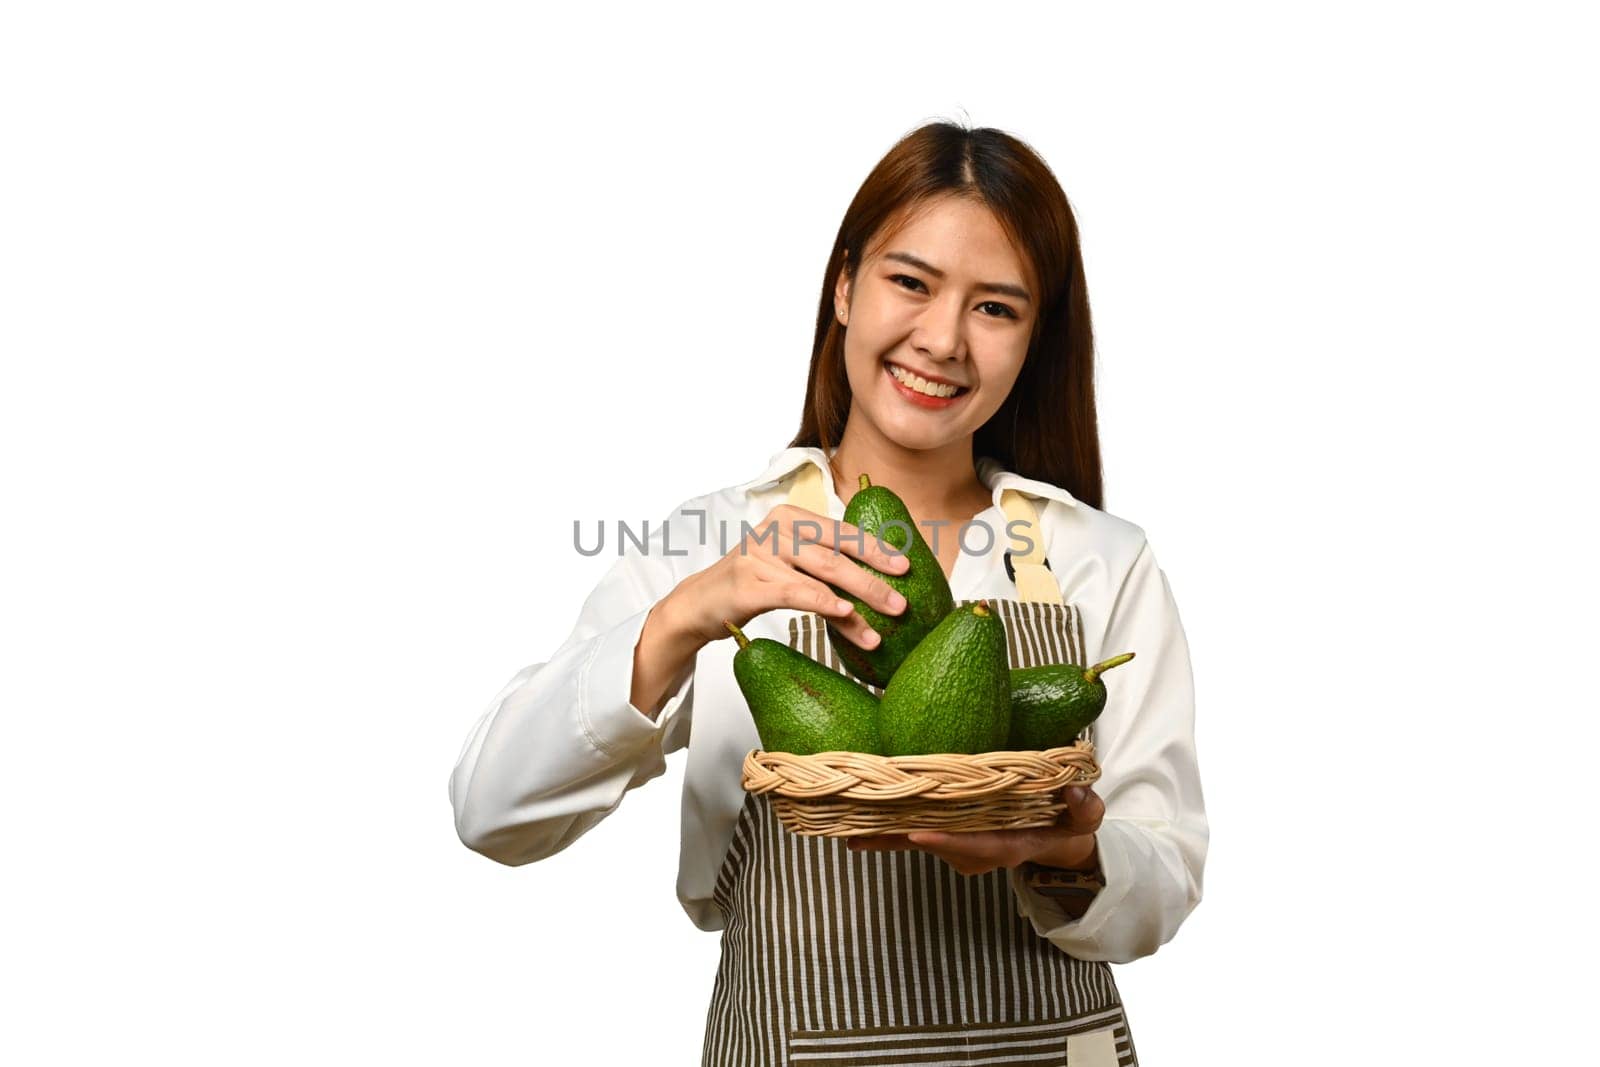 Beautiful woman holding ripe avocado in basket isolated on white background. Vegan food, healthy lifestyle concept.